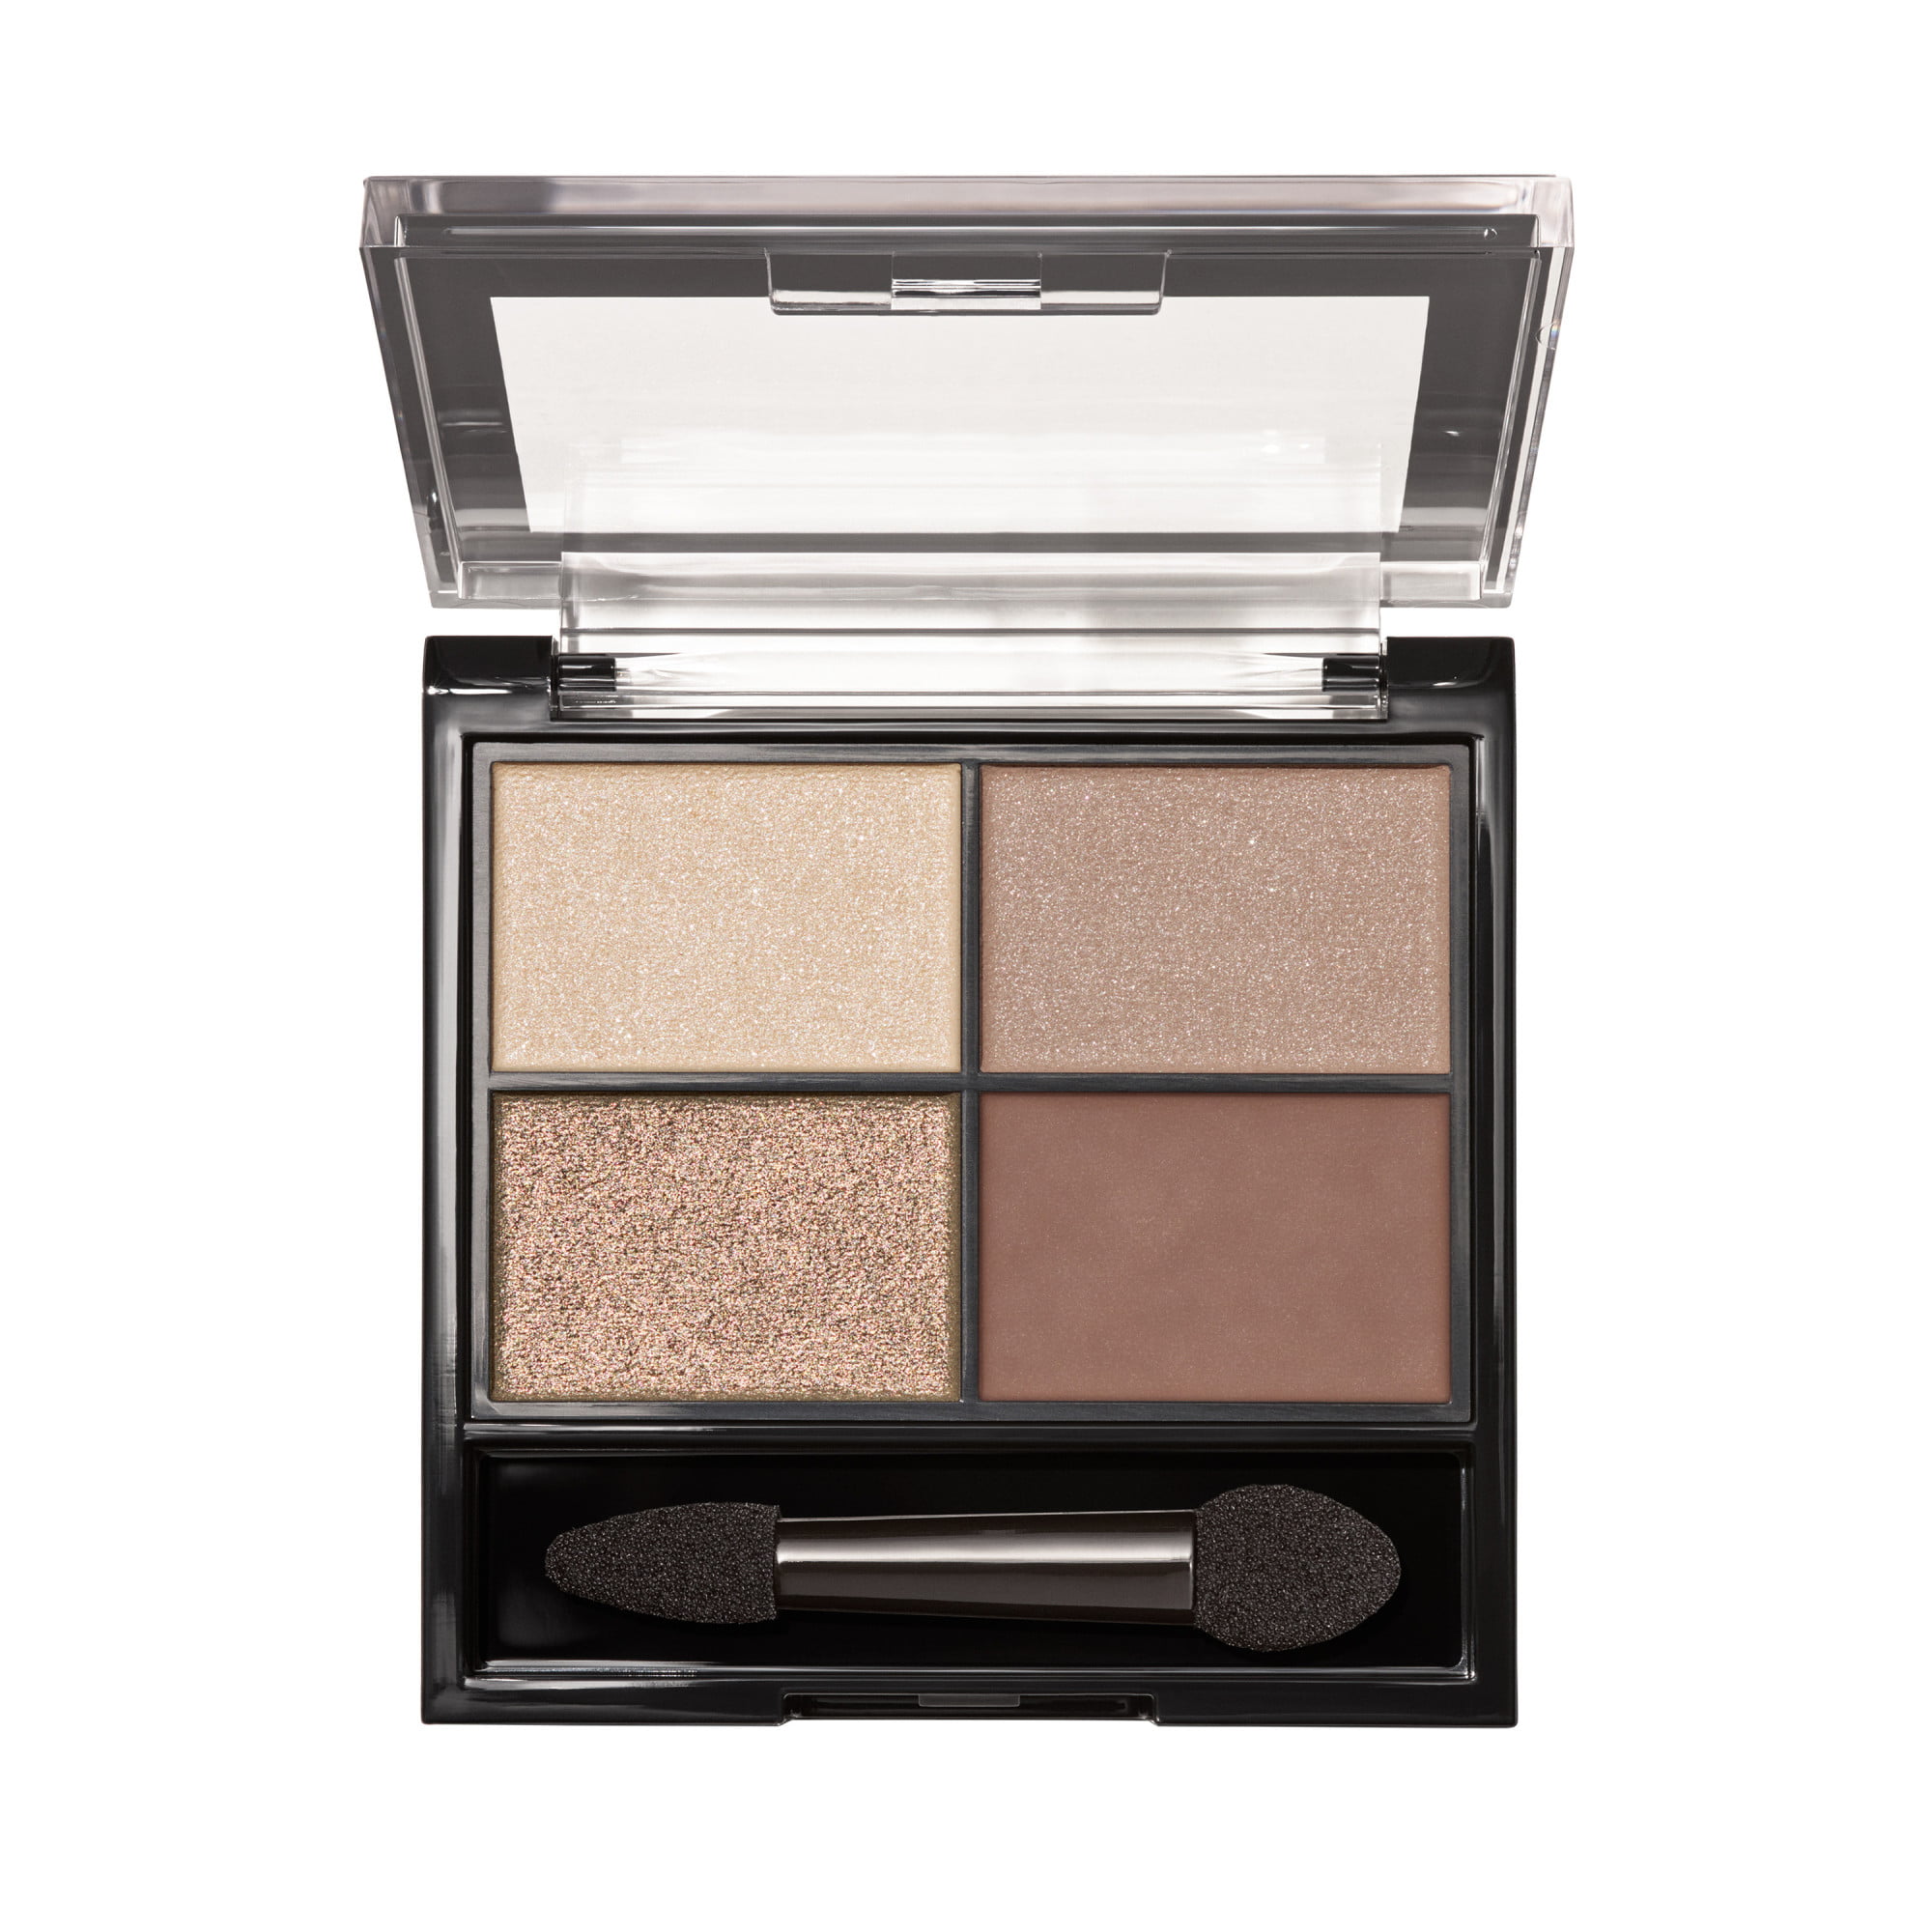 Revlon ColorStay Day to Night Long Lasting Matte and Shimmer Eyeshadow Quad, 500 Addictive - image 4 of 13